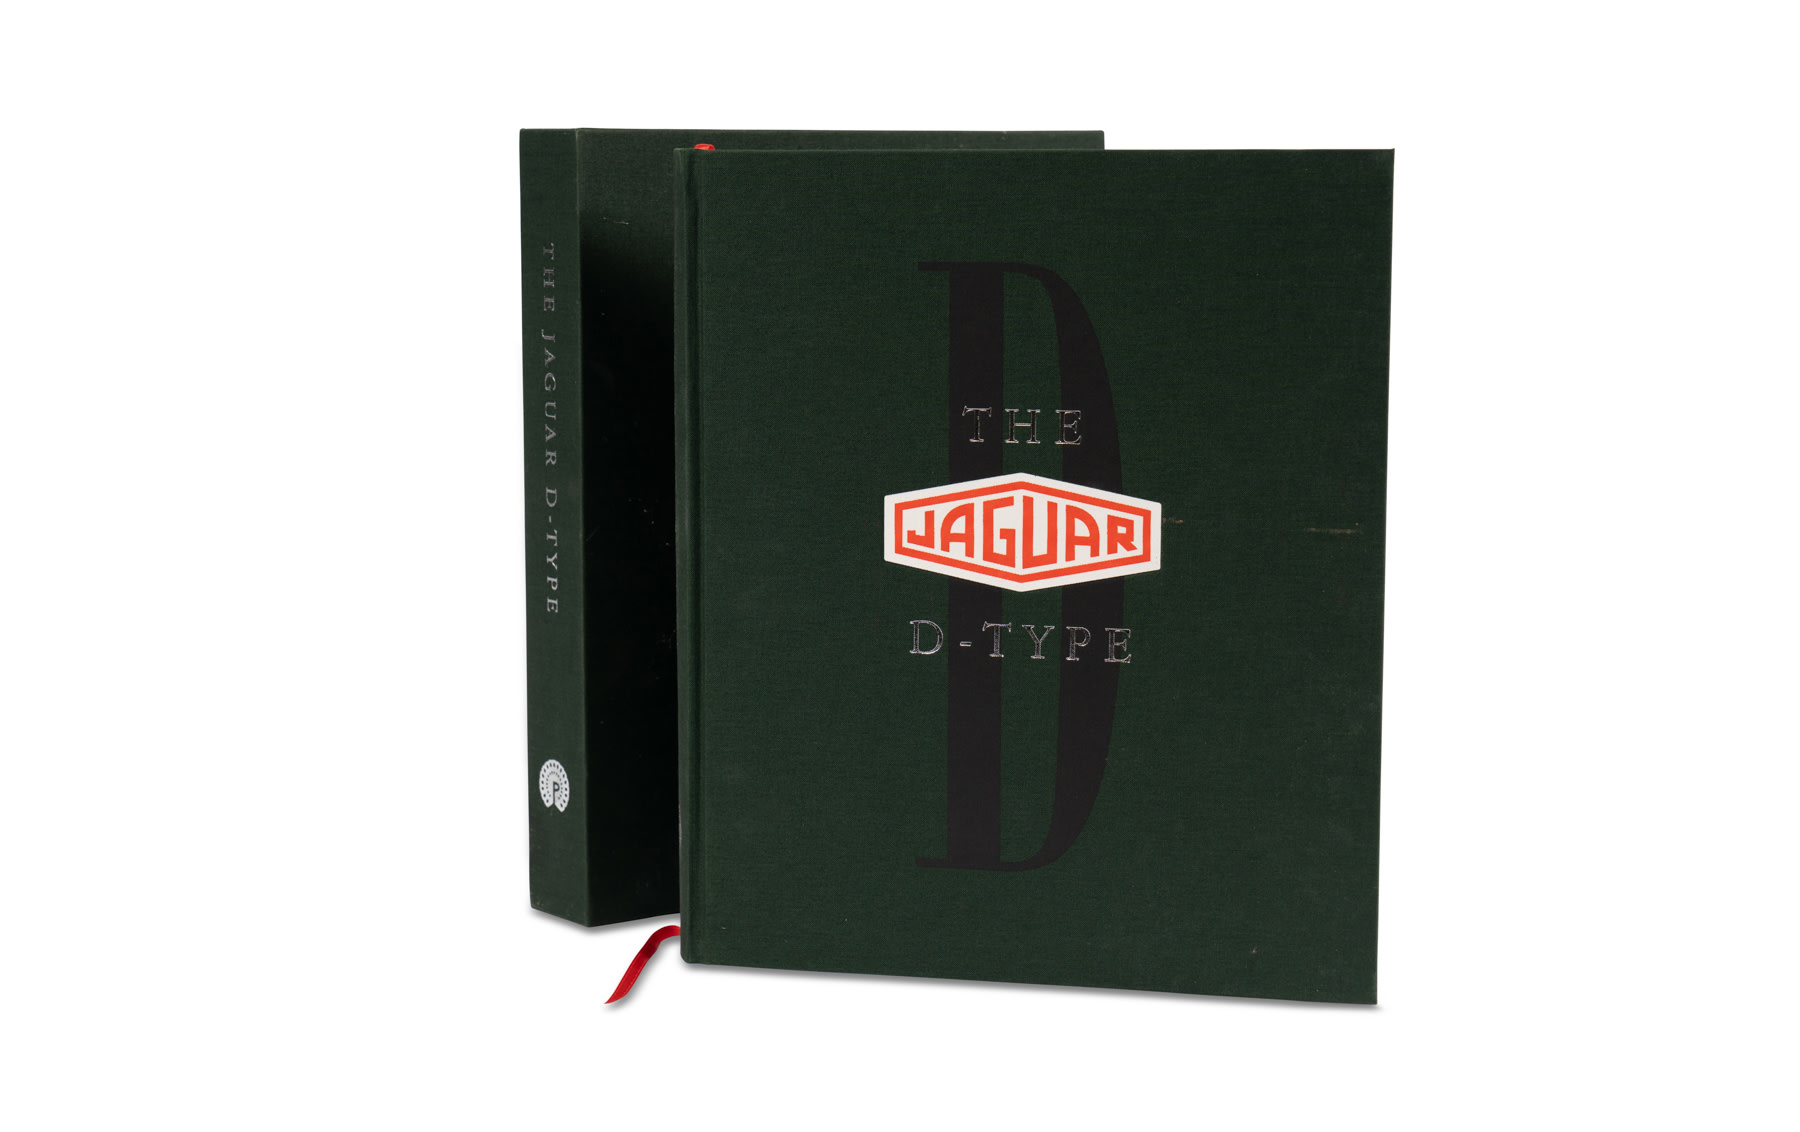 The Jaguar D-Type by Anthony Pritchard, Clothbound Edition, No. 82 of 250